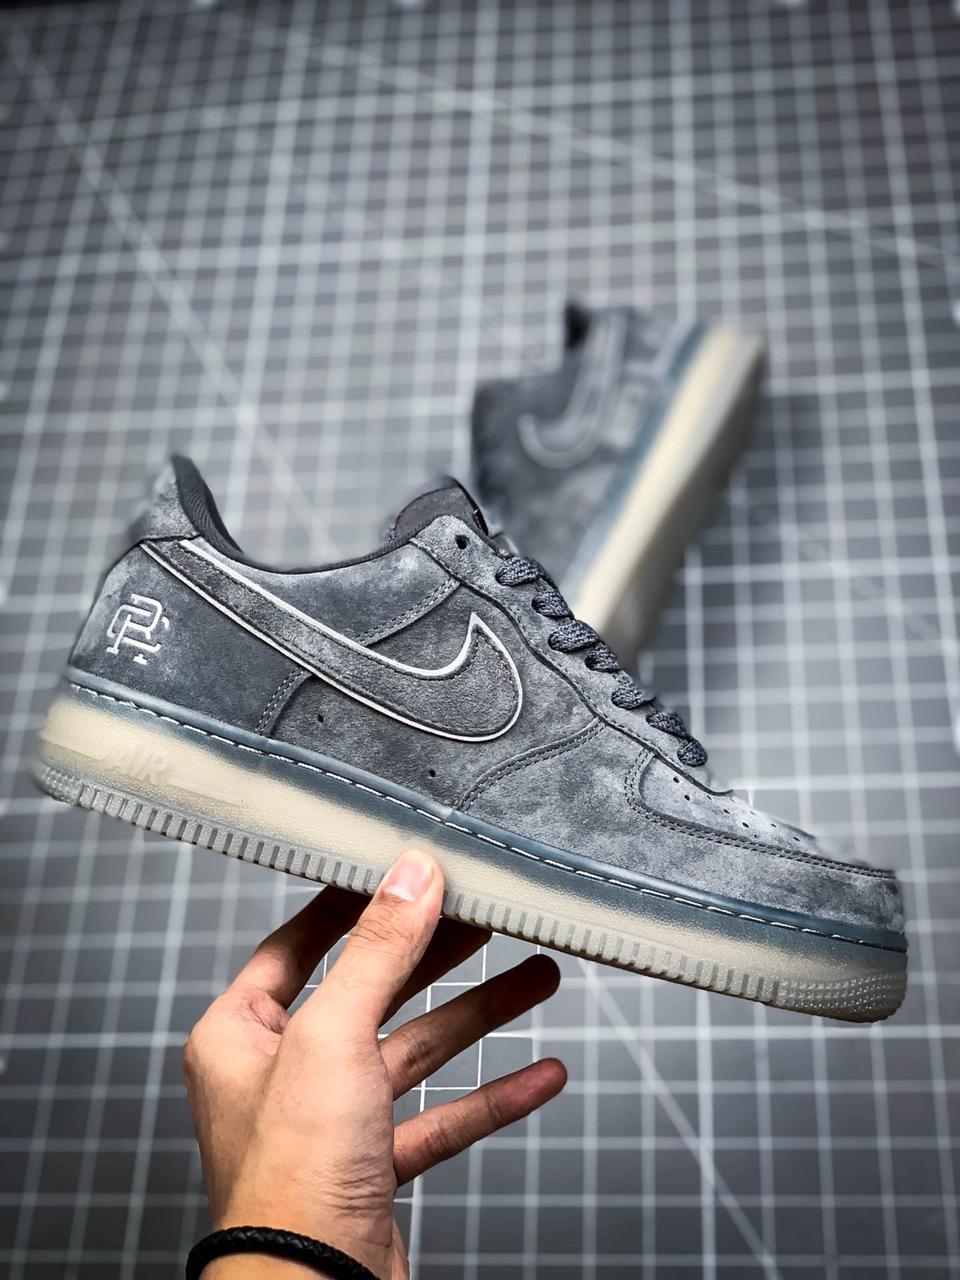 First Copy Nike Airforce 1 Reigning Champ Reflective